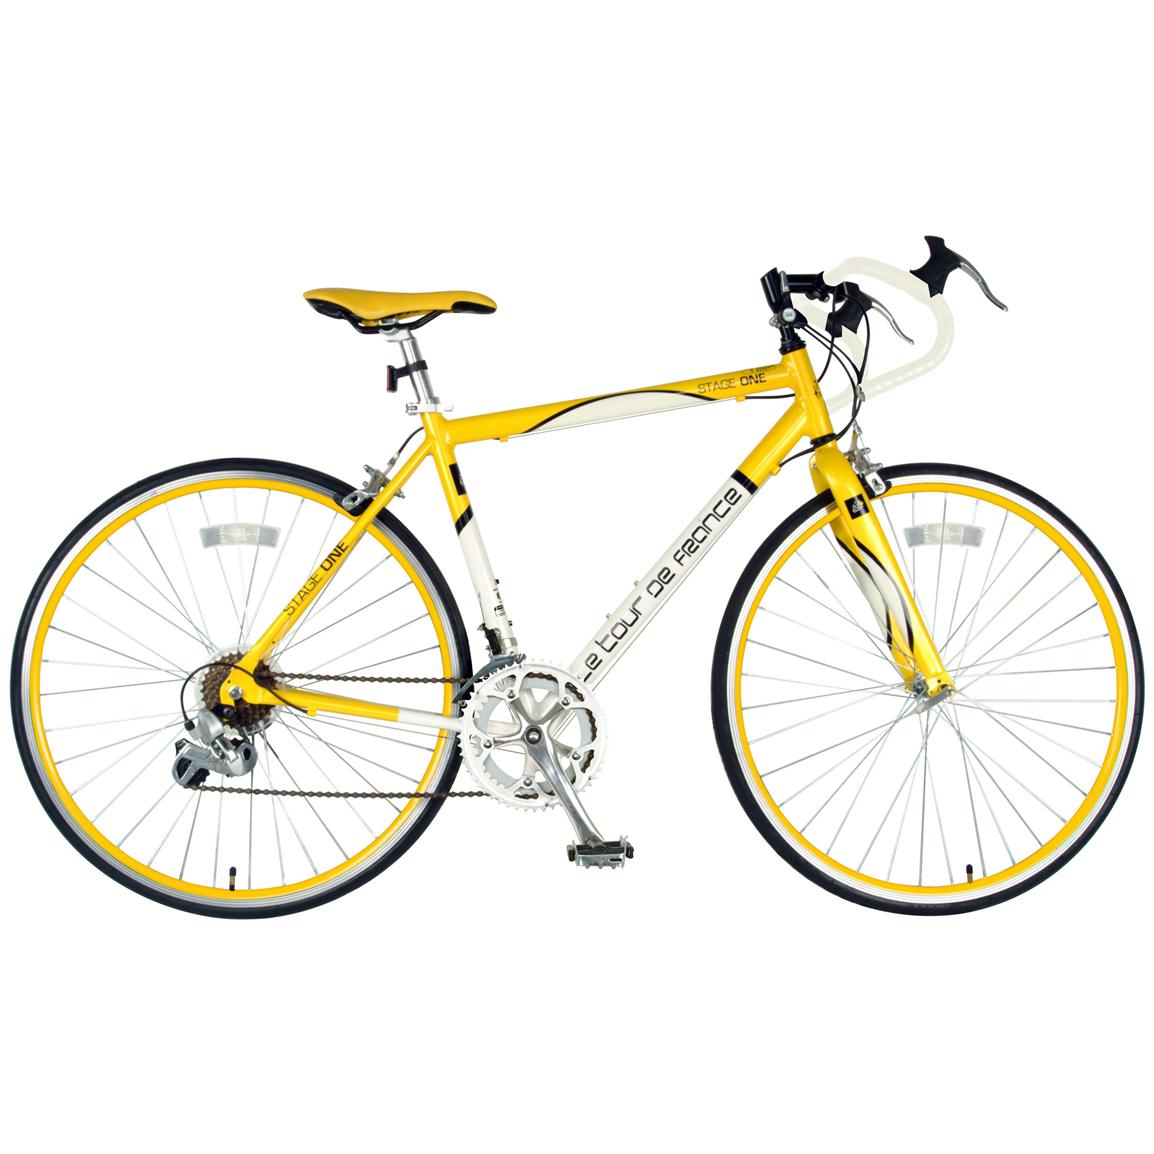 Tour de France 700c Stage One Yellow Jersey Road Bike 222786, at Sportsman's Guide